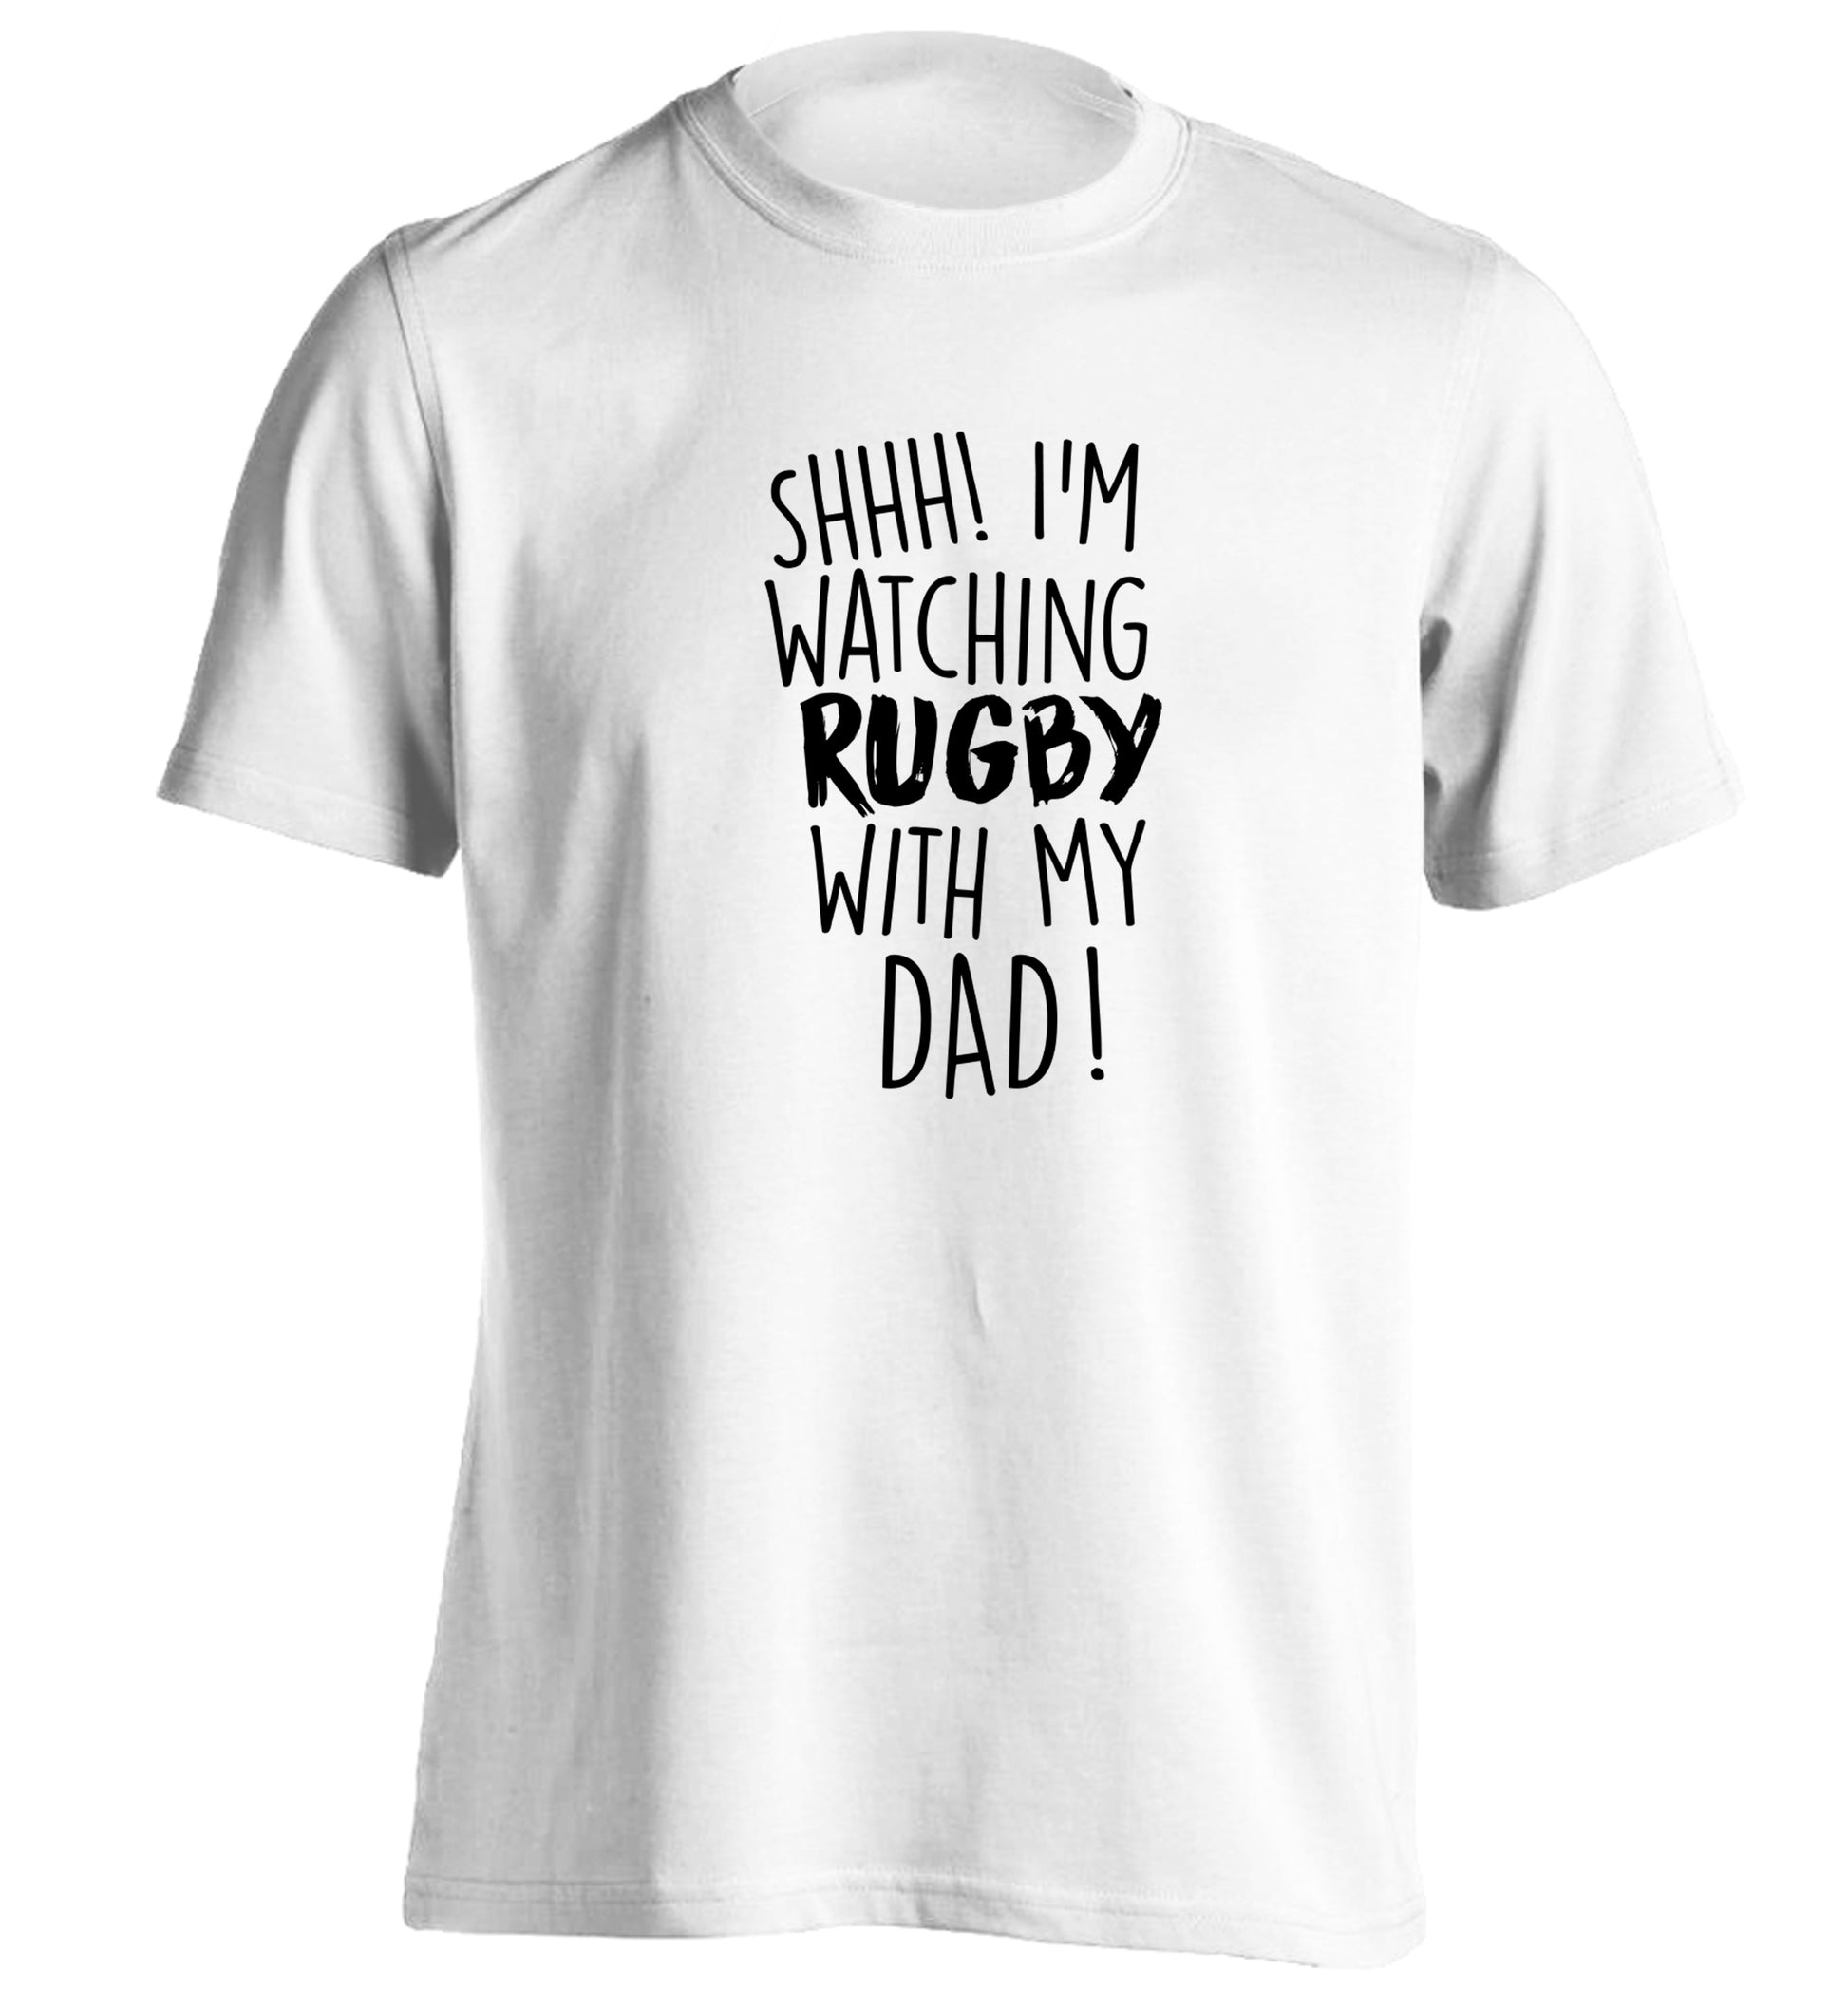 Shh... I'm watching rugby with my dad adults unisex white Tshirt 2XL